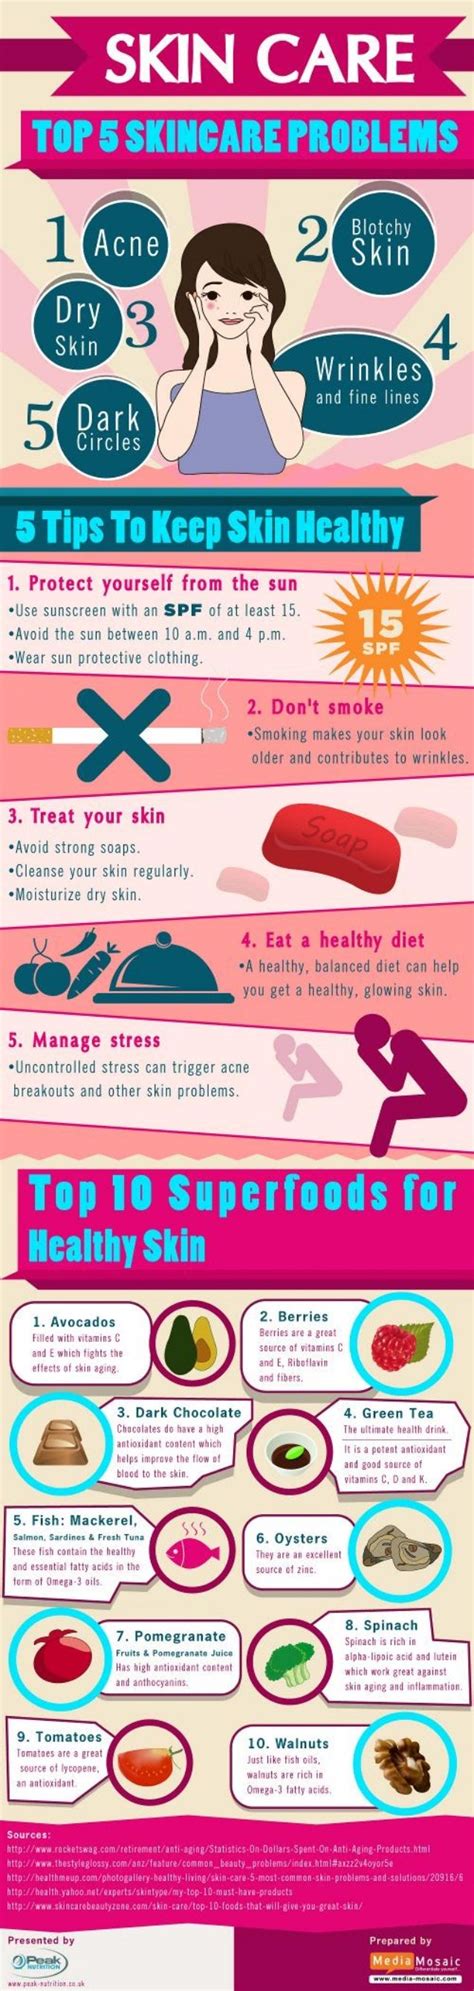 Skin Care Problems And Tips To Keep Skin Healthy Infographic